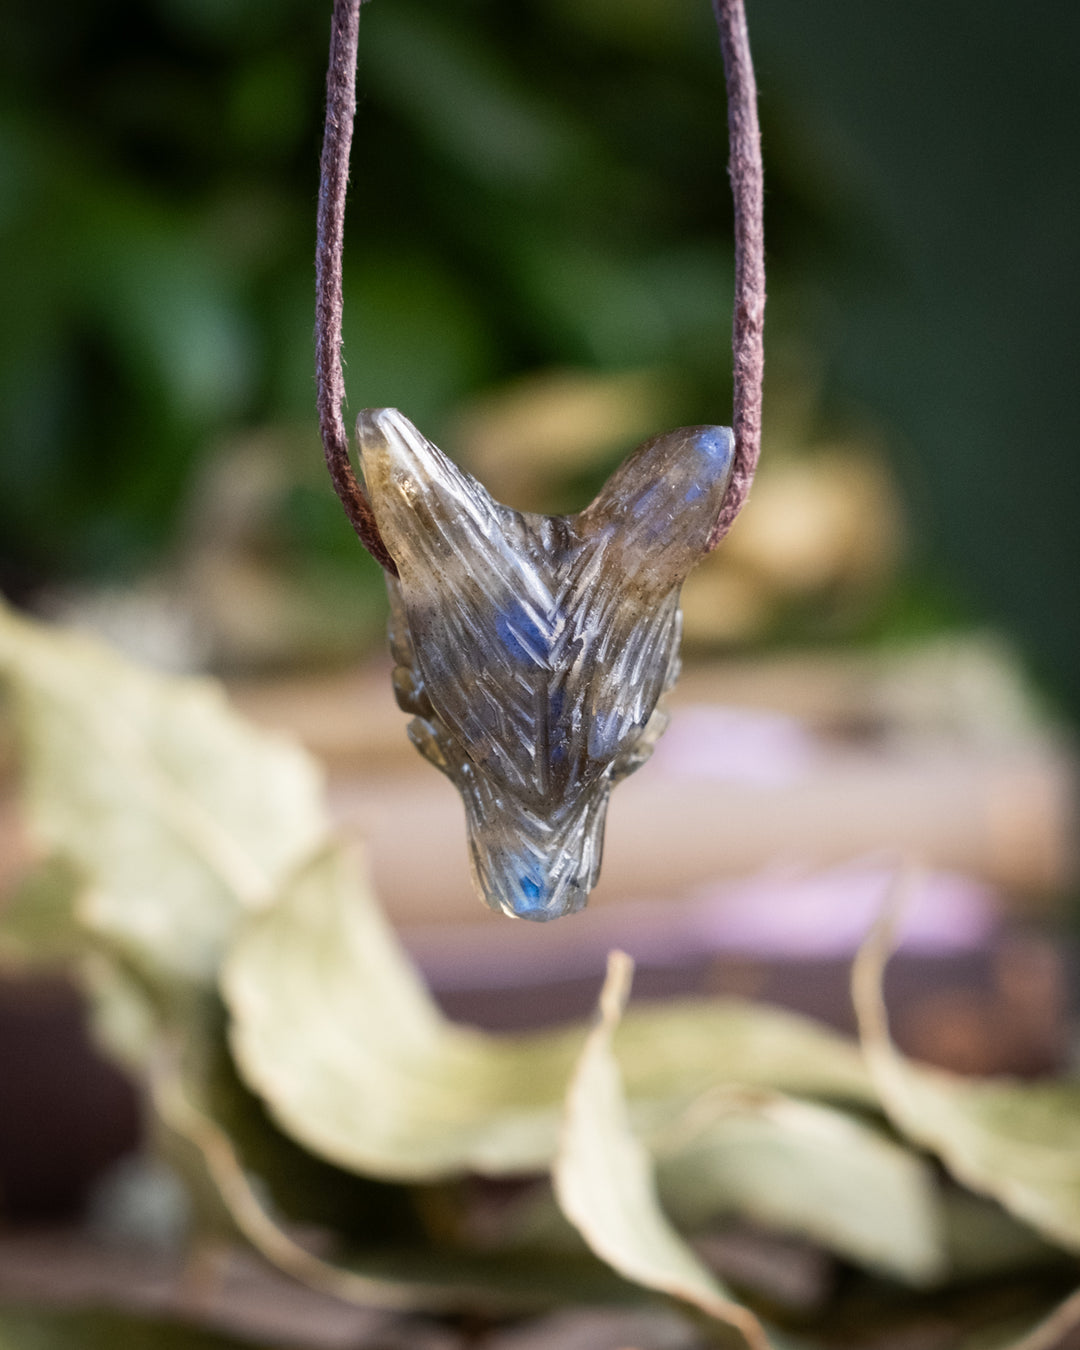 Small Labradorite Hand Carved Wolf Necklace - The Healing Pear